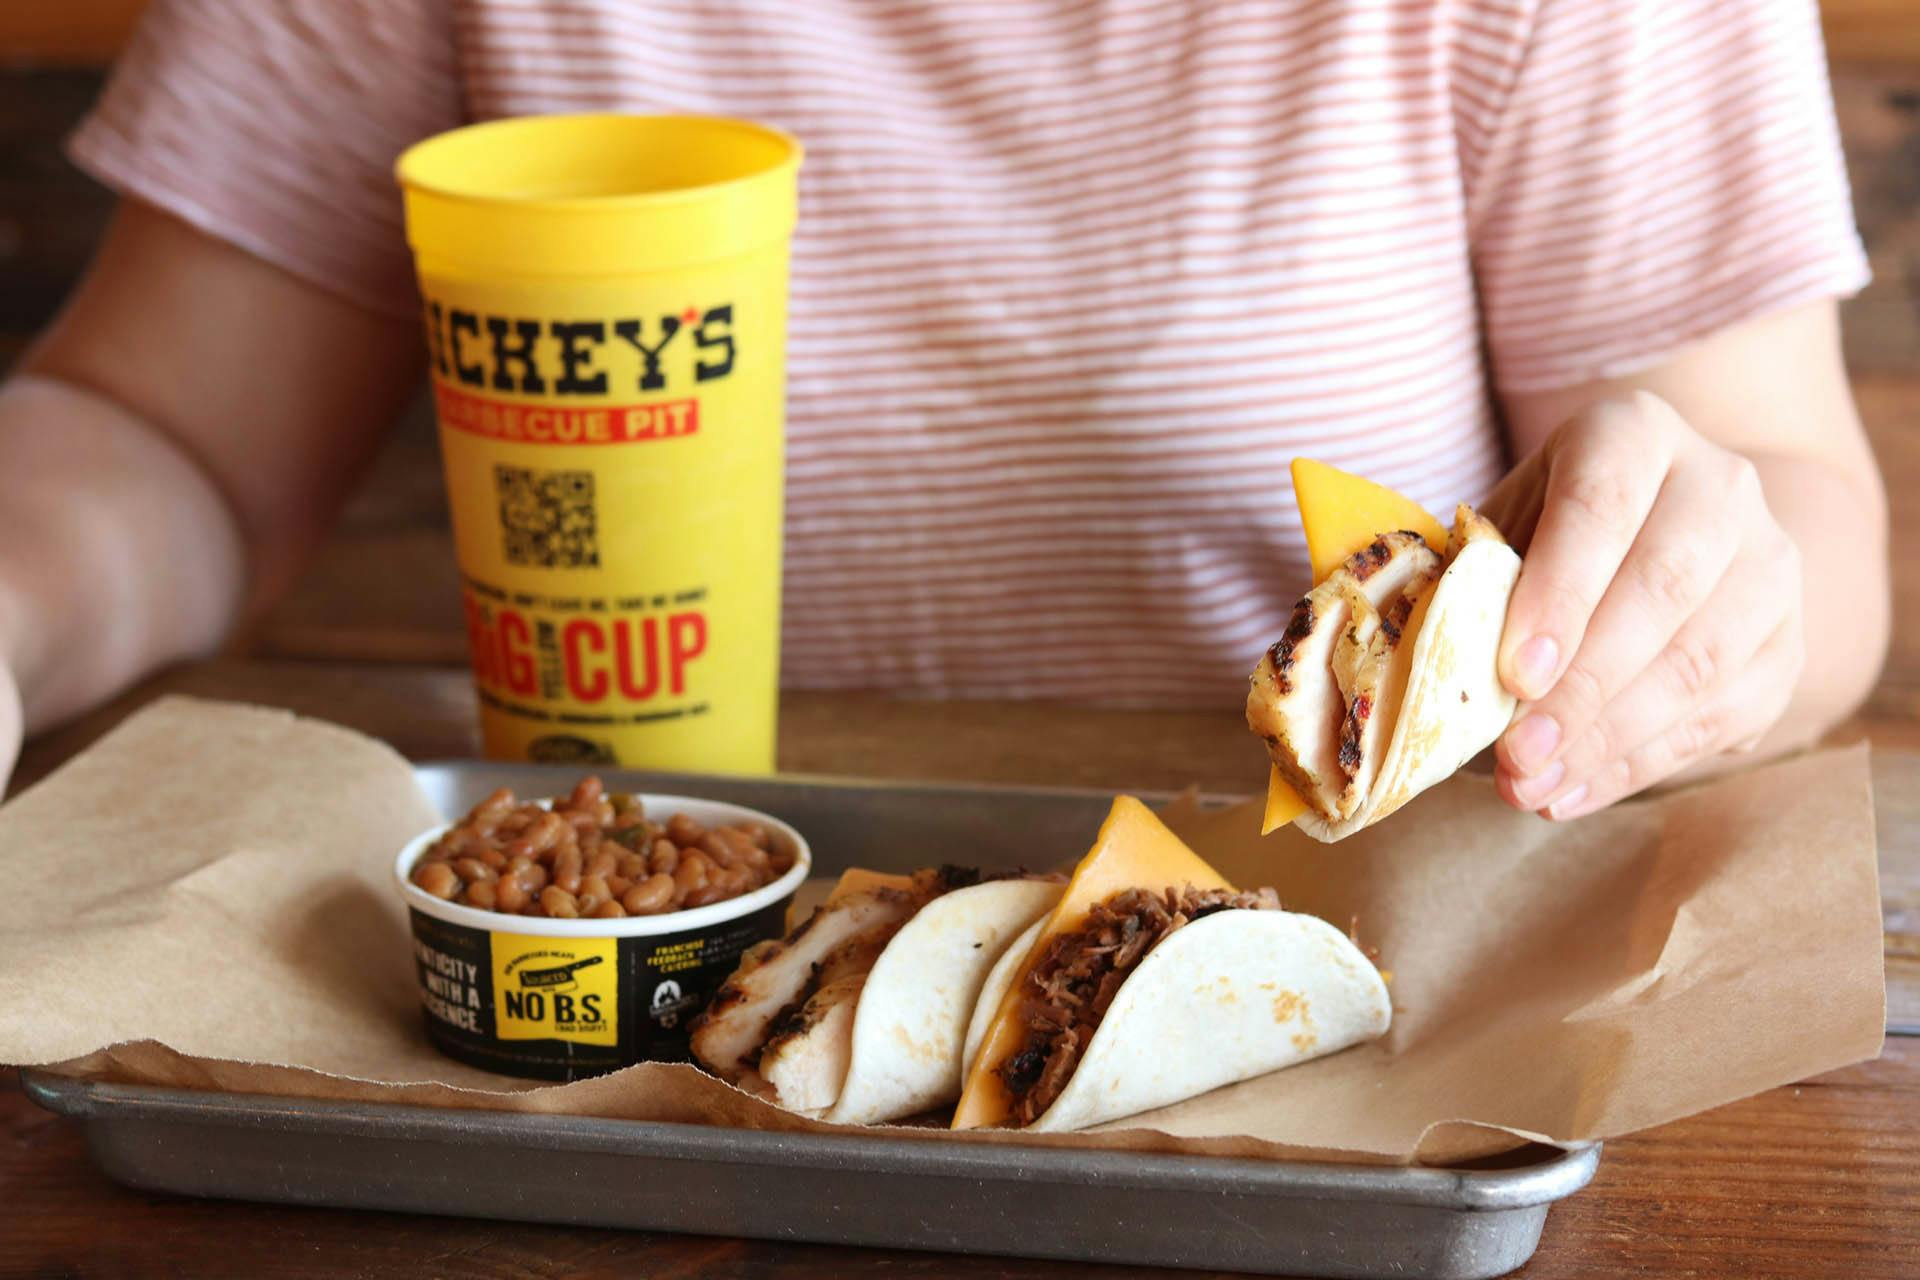 Veteran Achieves Dream of Owning a Restaurant with New Dickey’s Barbecue Pit